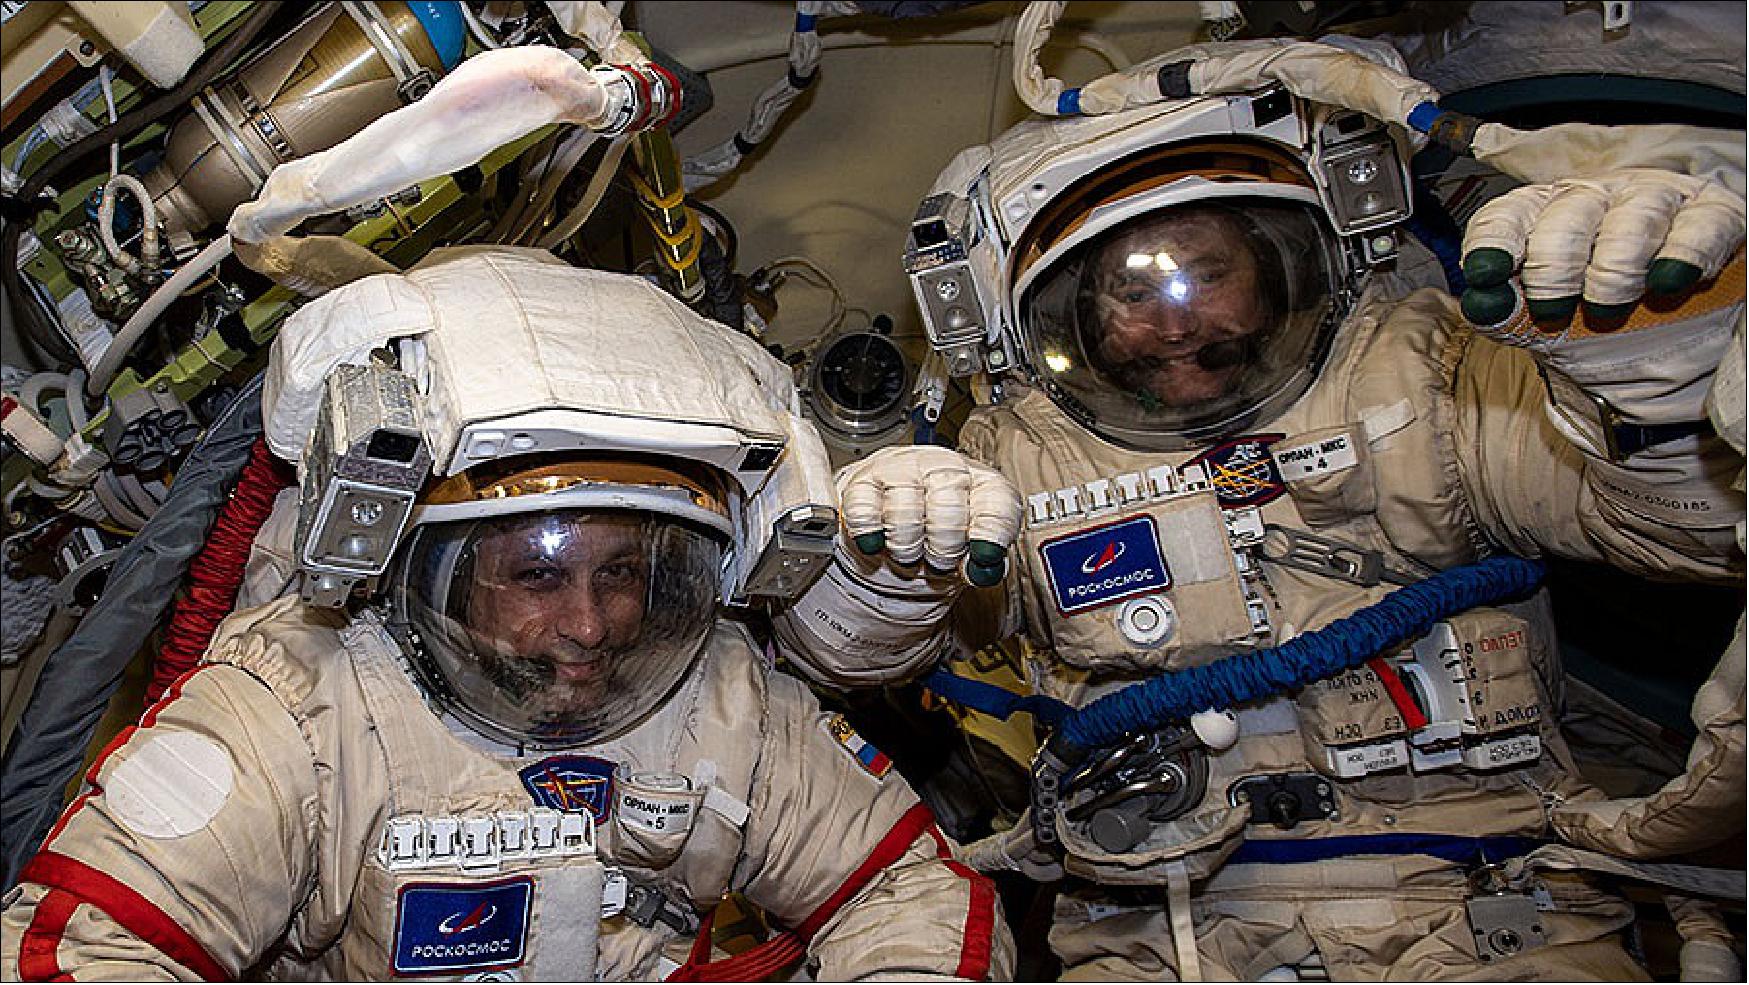 Figure 20: Cosmonauts (from left) Anton Shkaplerov and Pyotr Dubrov are pictured in their Russian Orlan spacesuits for a fit check and leak checks on Jan. 14 (image credit: NASA TV)